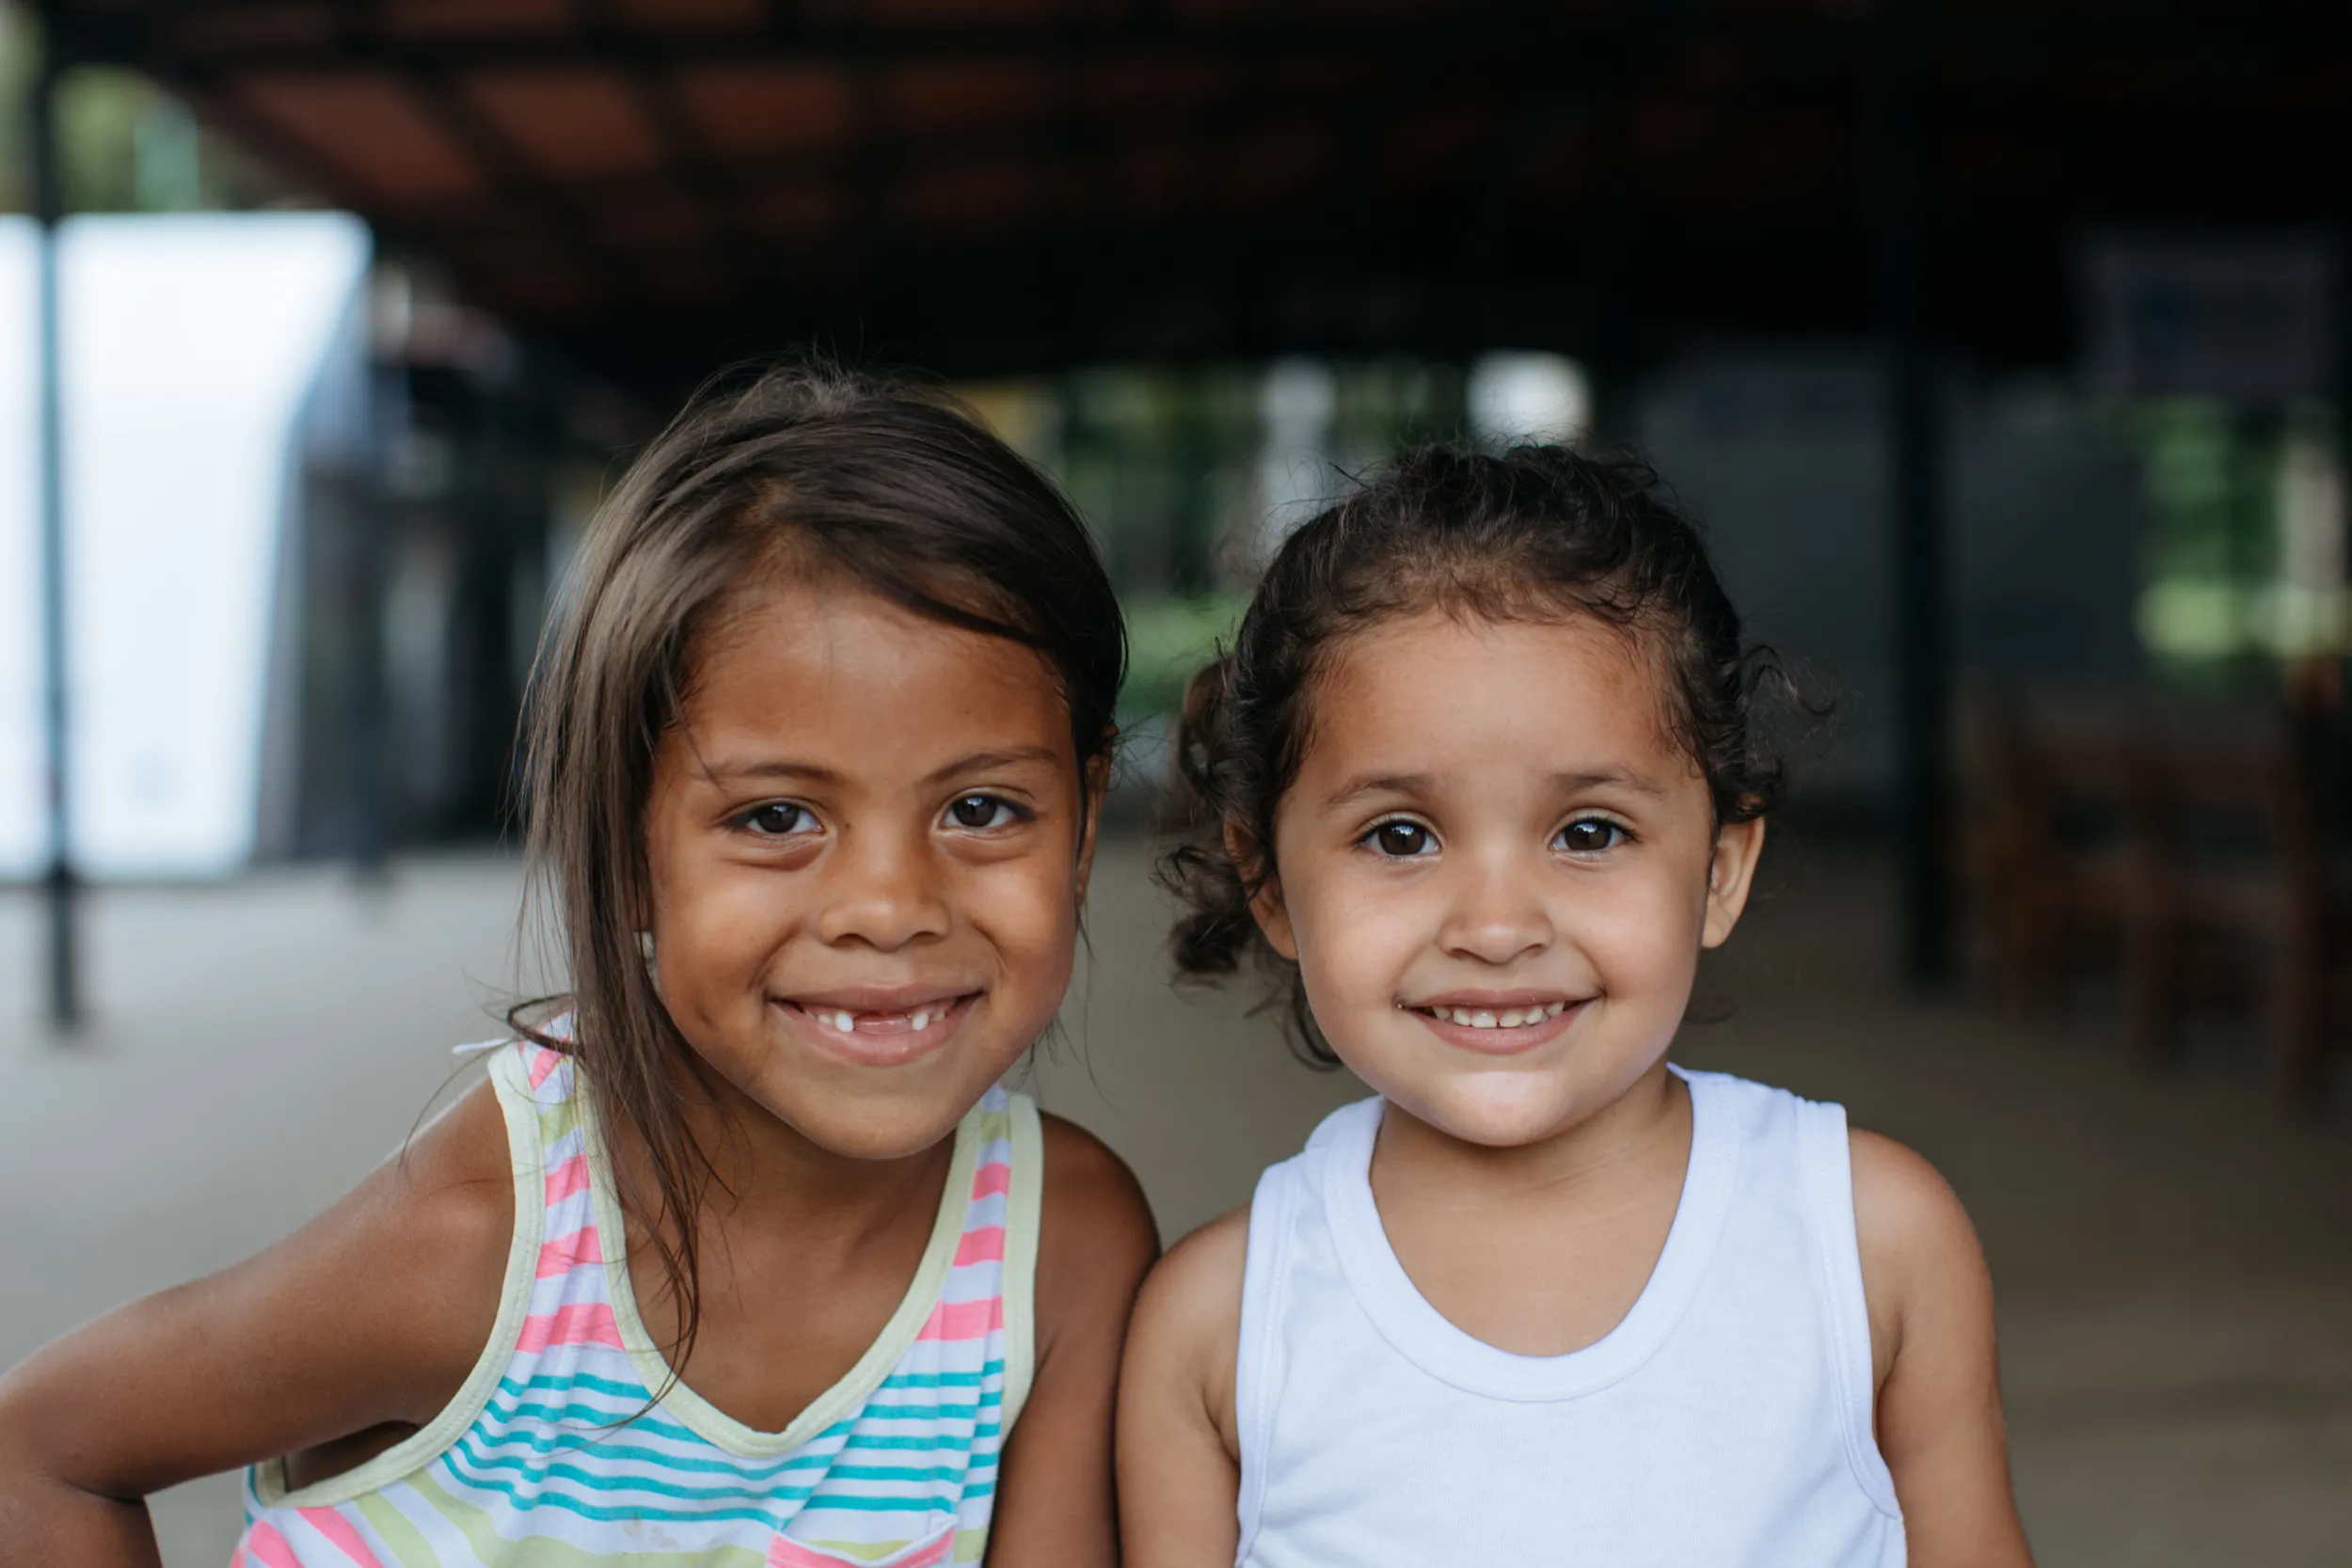 Salma, left, and Ariana, right, fled Venezuela with their family. Photo credit: Paddy Dowling